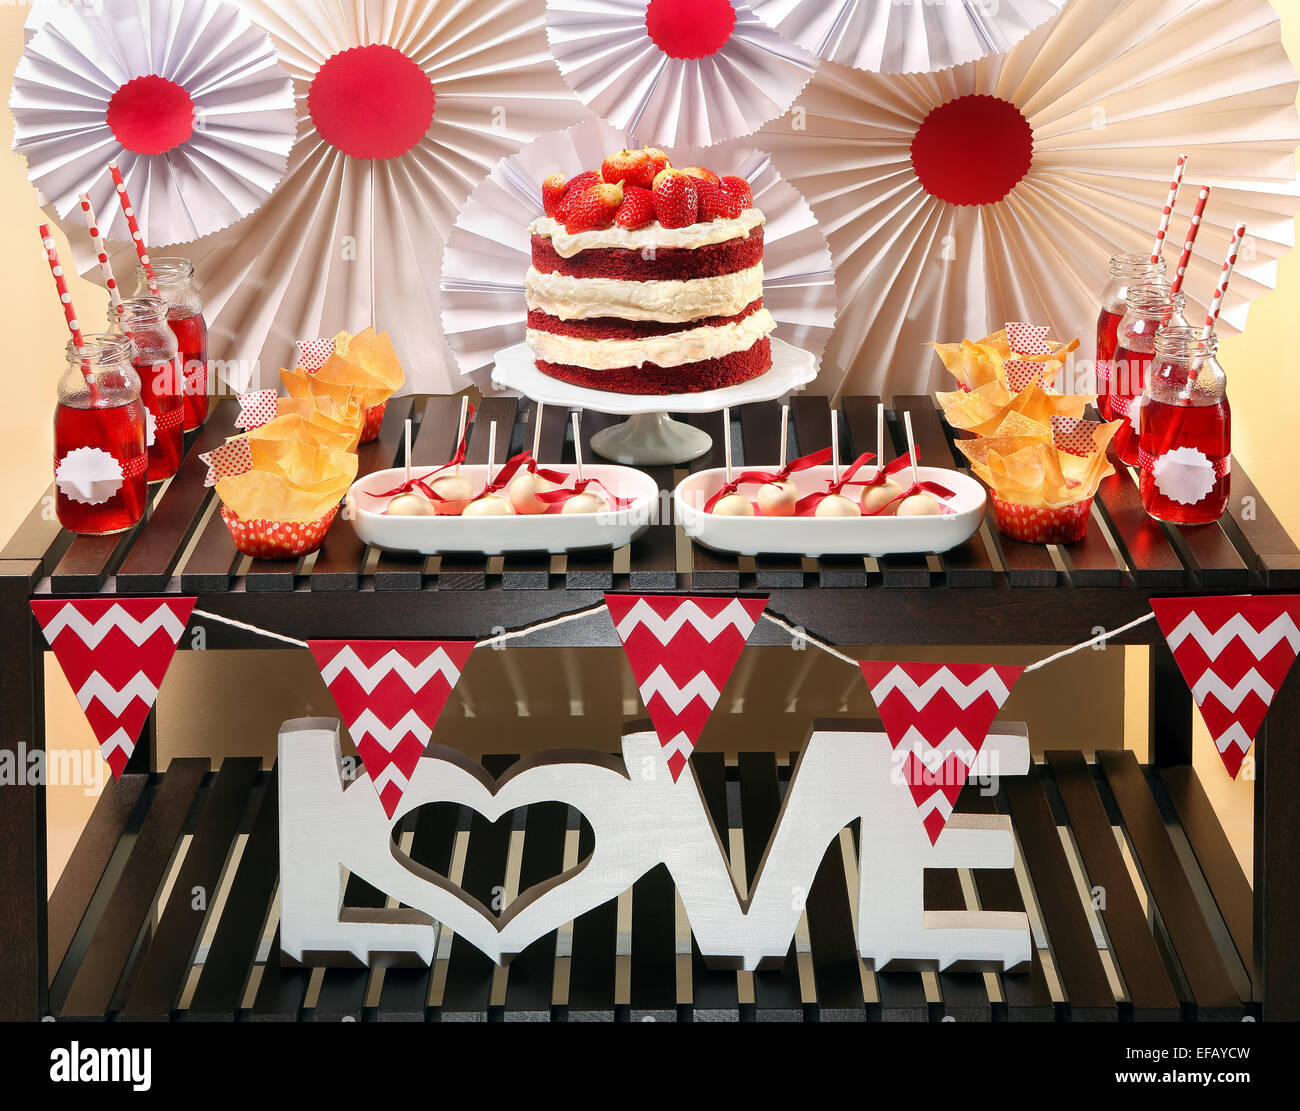 Valentine's Day party table with red velvet cake Stock Photo